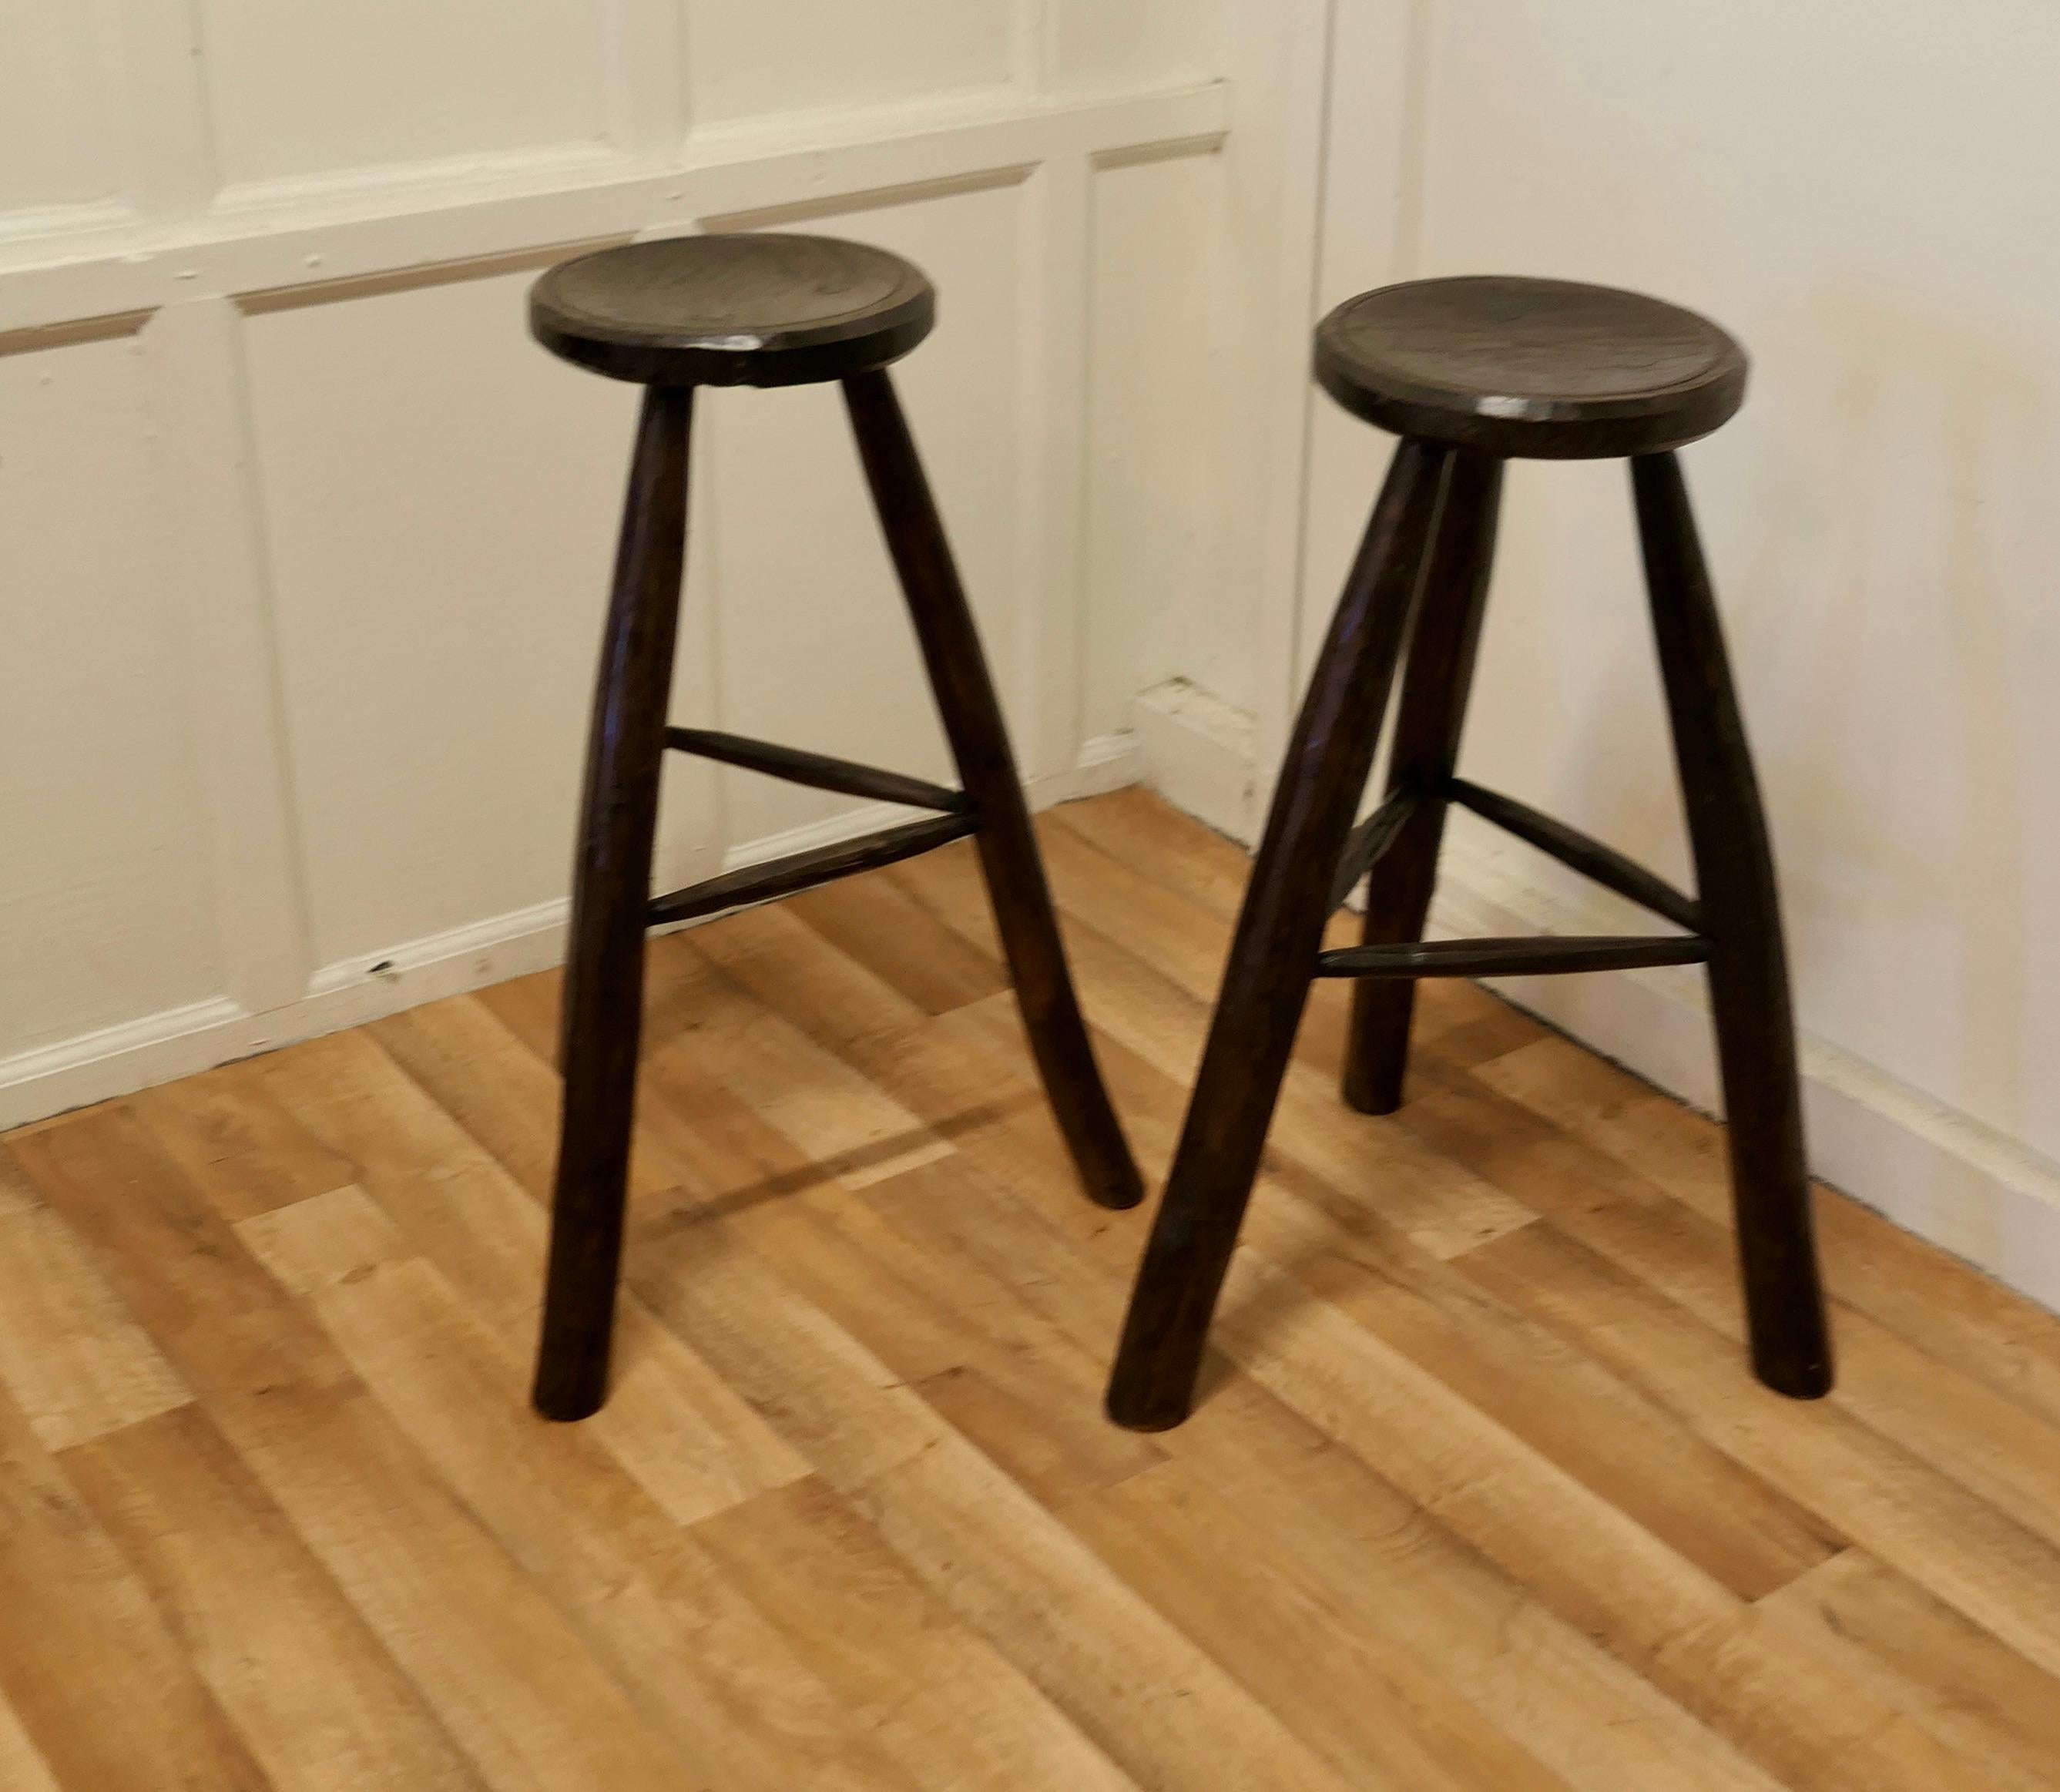 A pair of very rustic 19th century French high stools.

These are long leg stools they are made in ash and elm, the seats are hand carved from one solid piece, each of the 3 legs carved from a single branch and set into the seat.
The Stools are